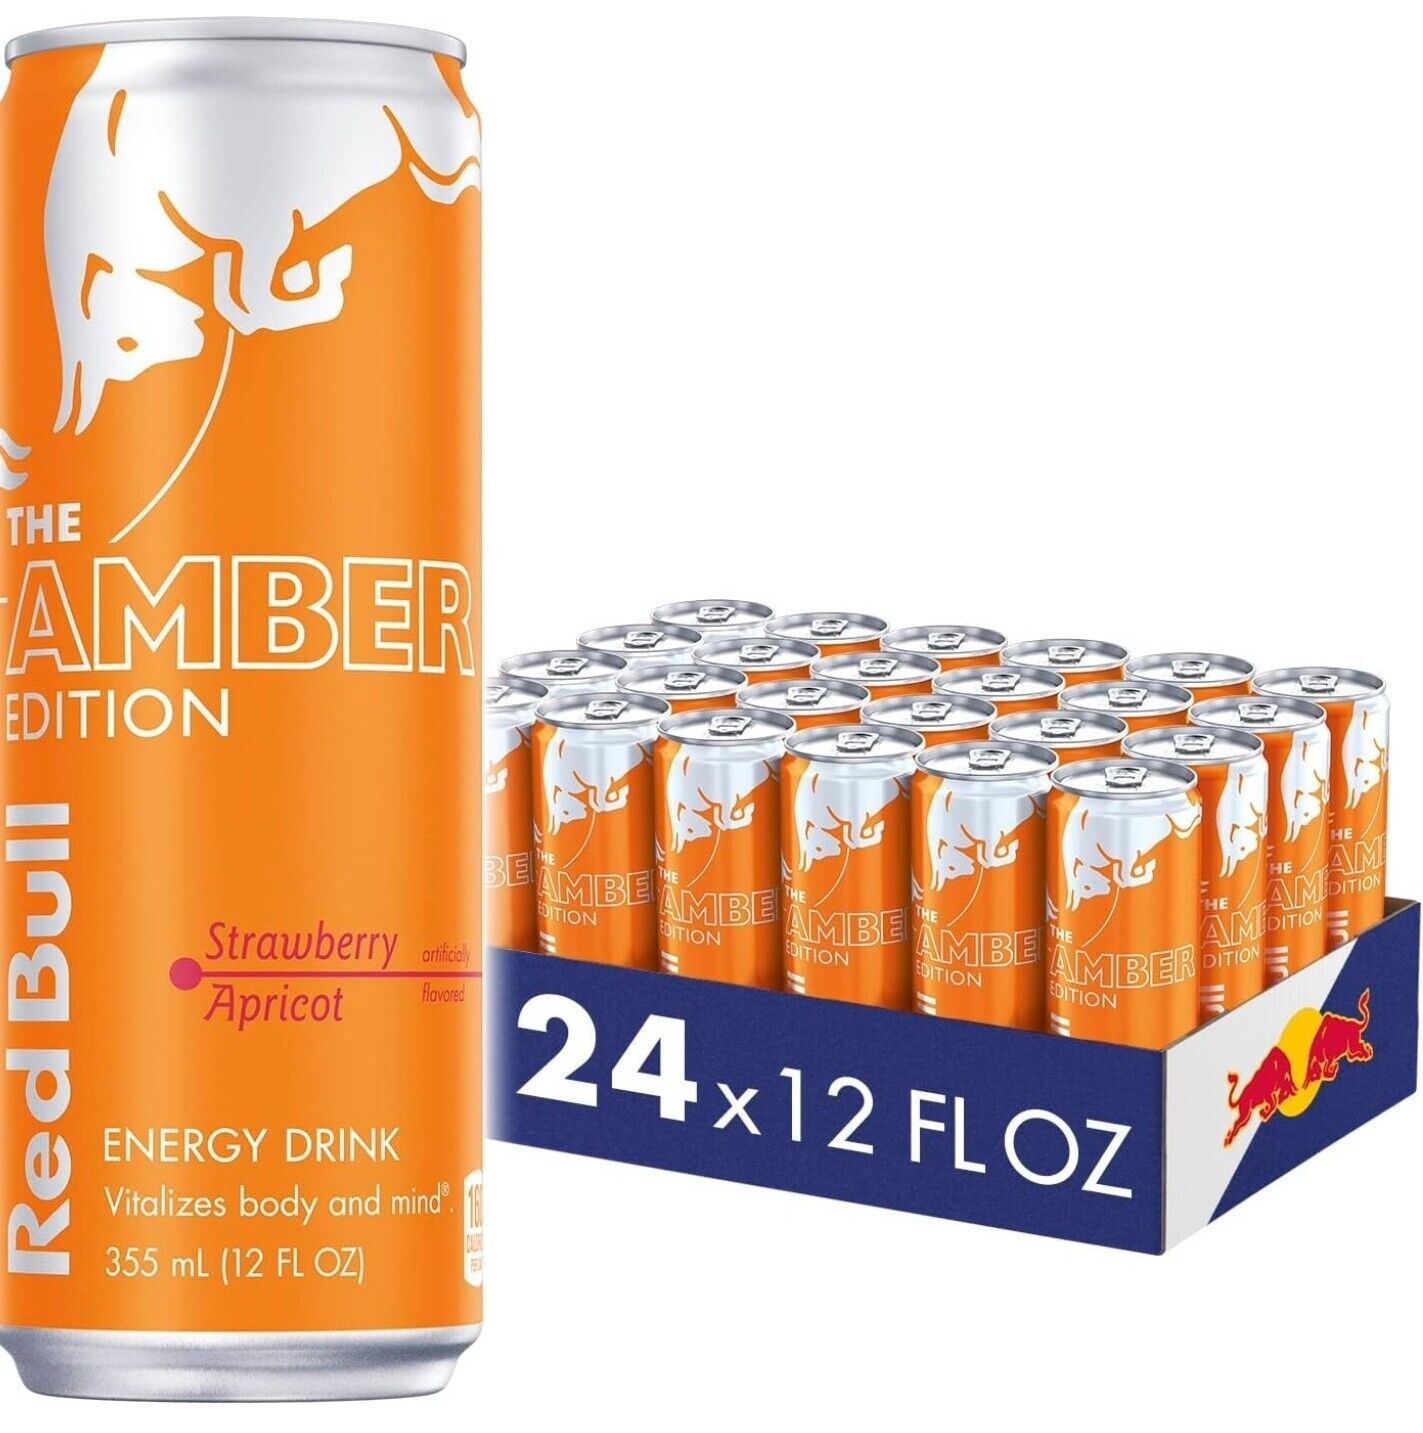 Red Bull Amber Edition Strawberry Apricot Energy Drink, 12 Fl Oz, 24 Cans